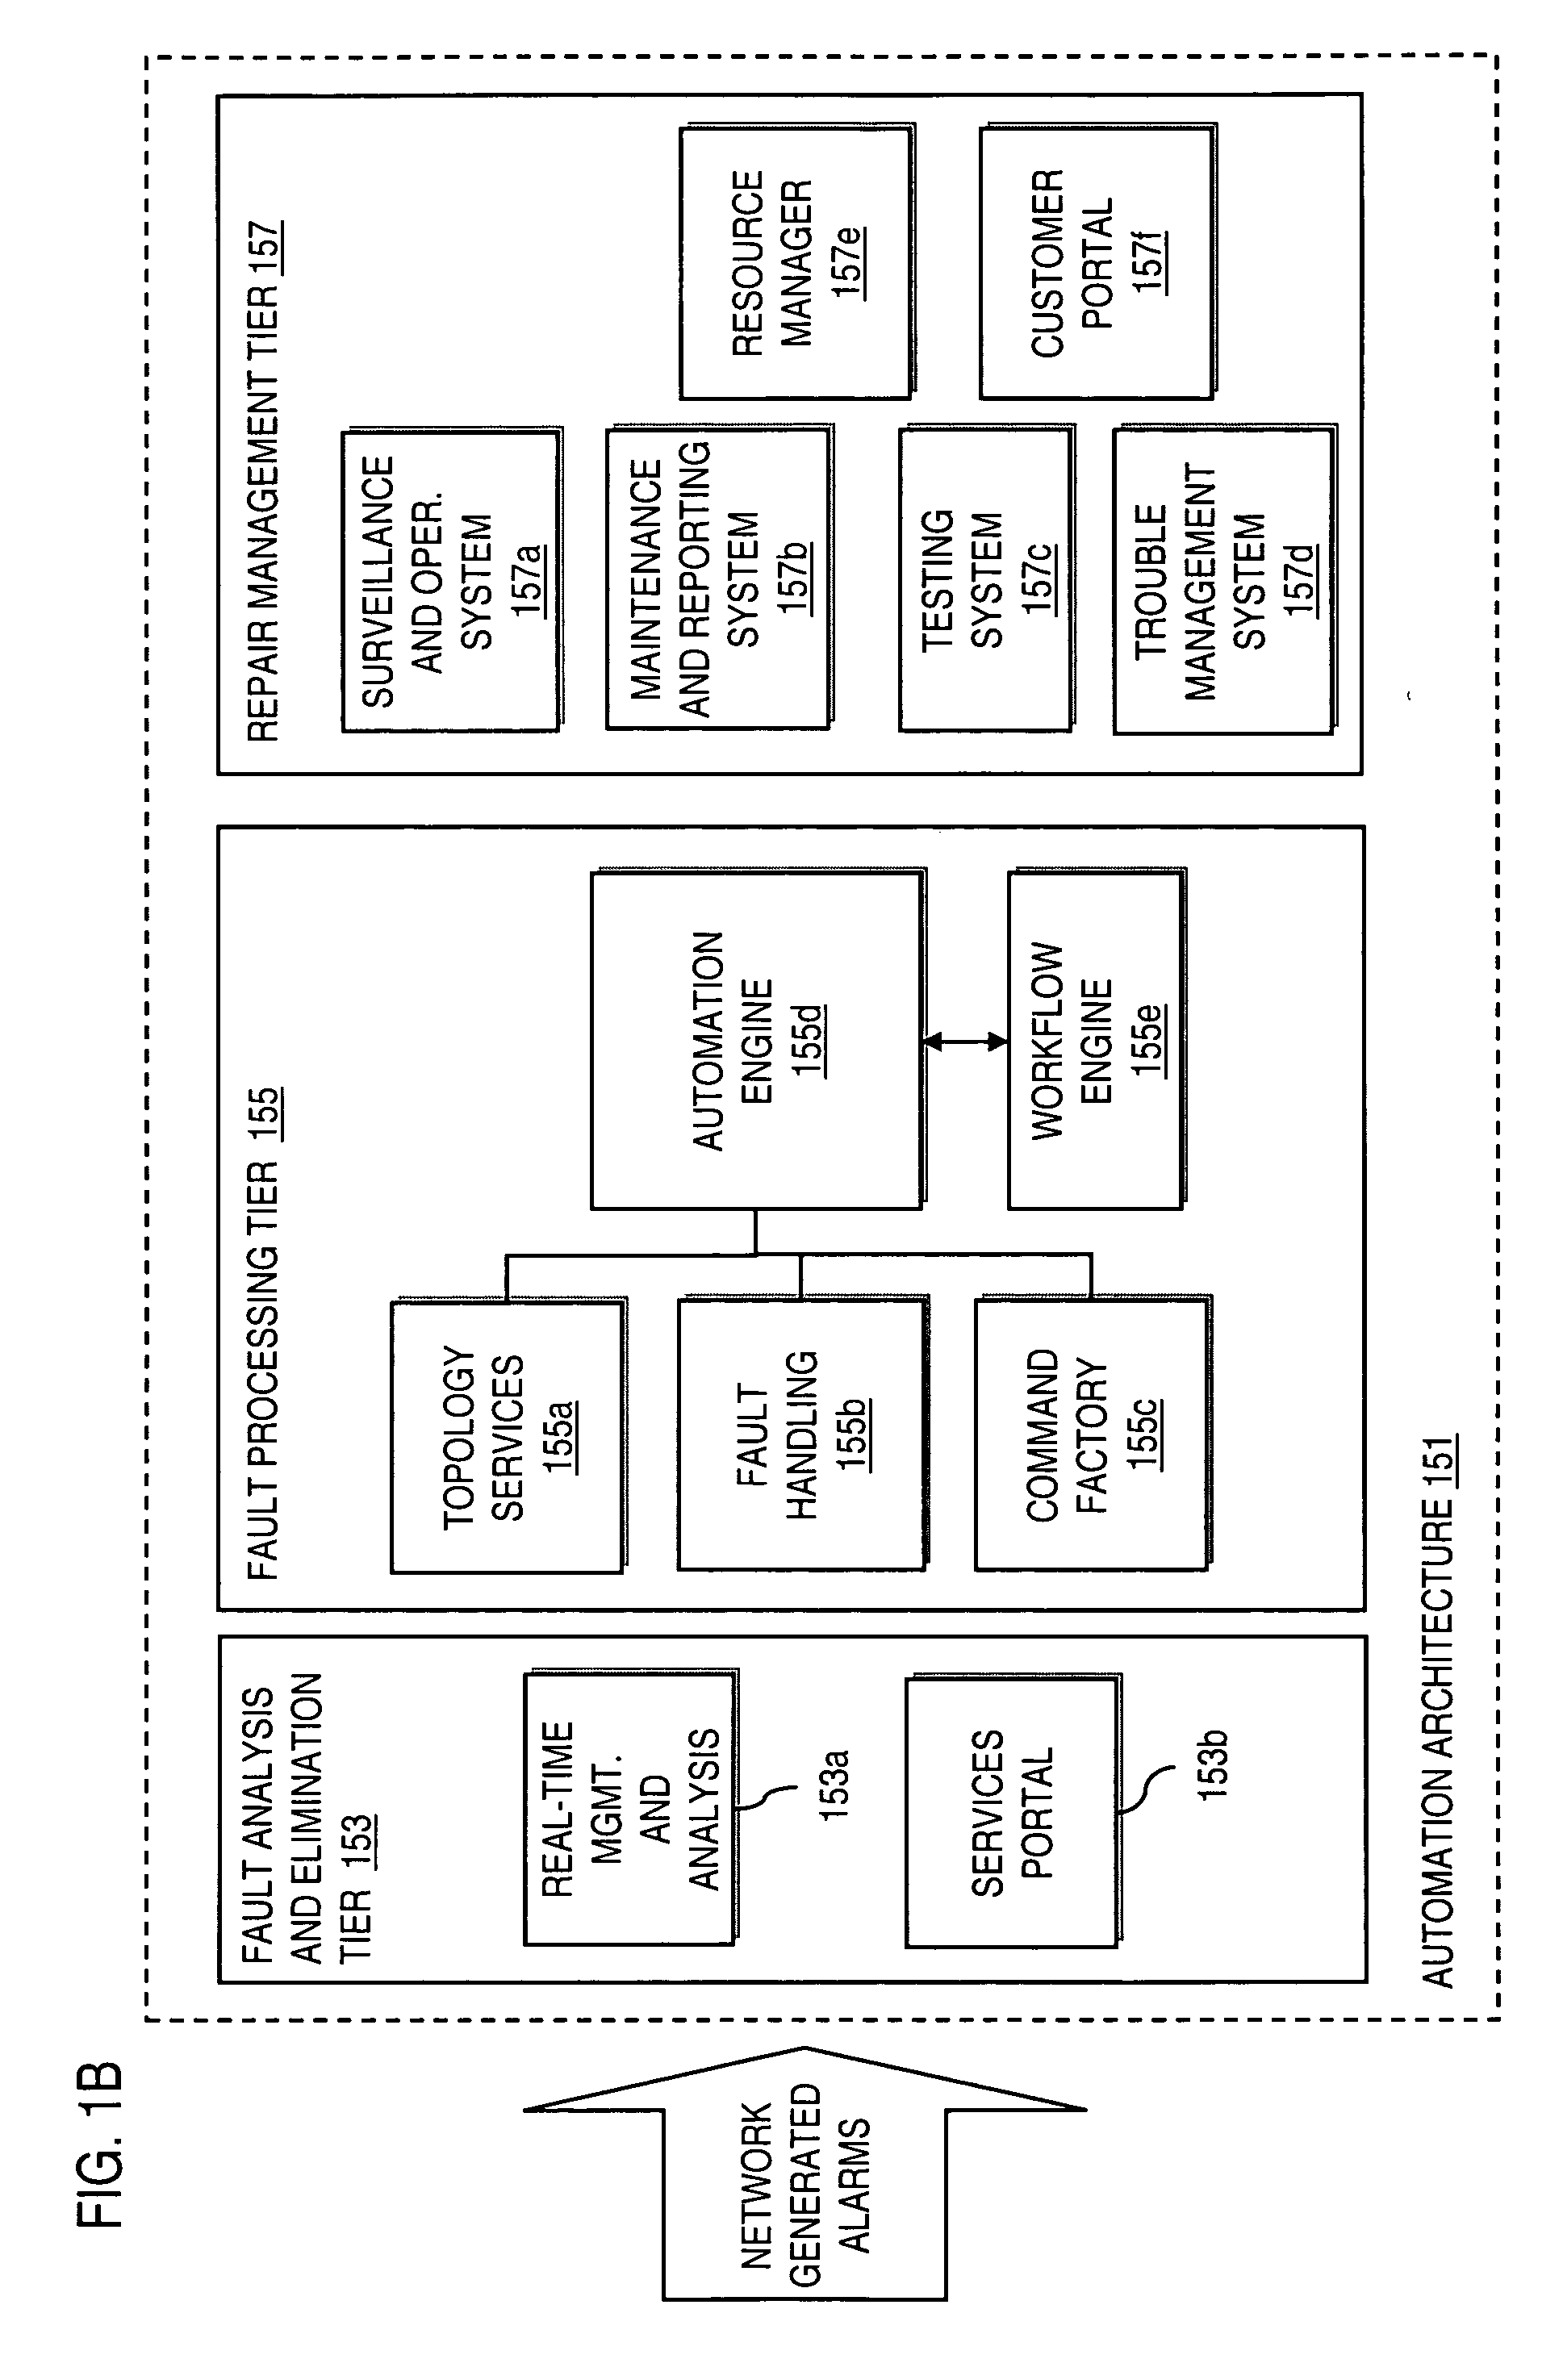 Method and system for providing automated data retrieval in support of fault isolation in a managed services network